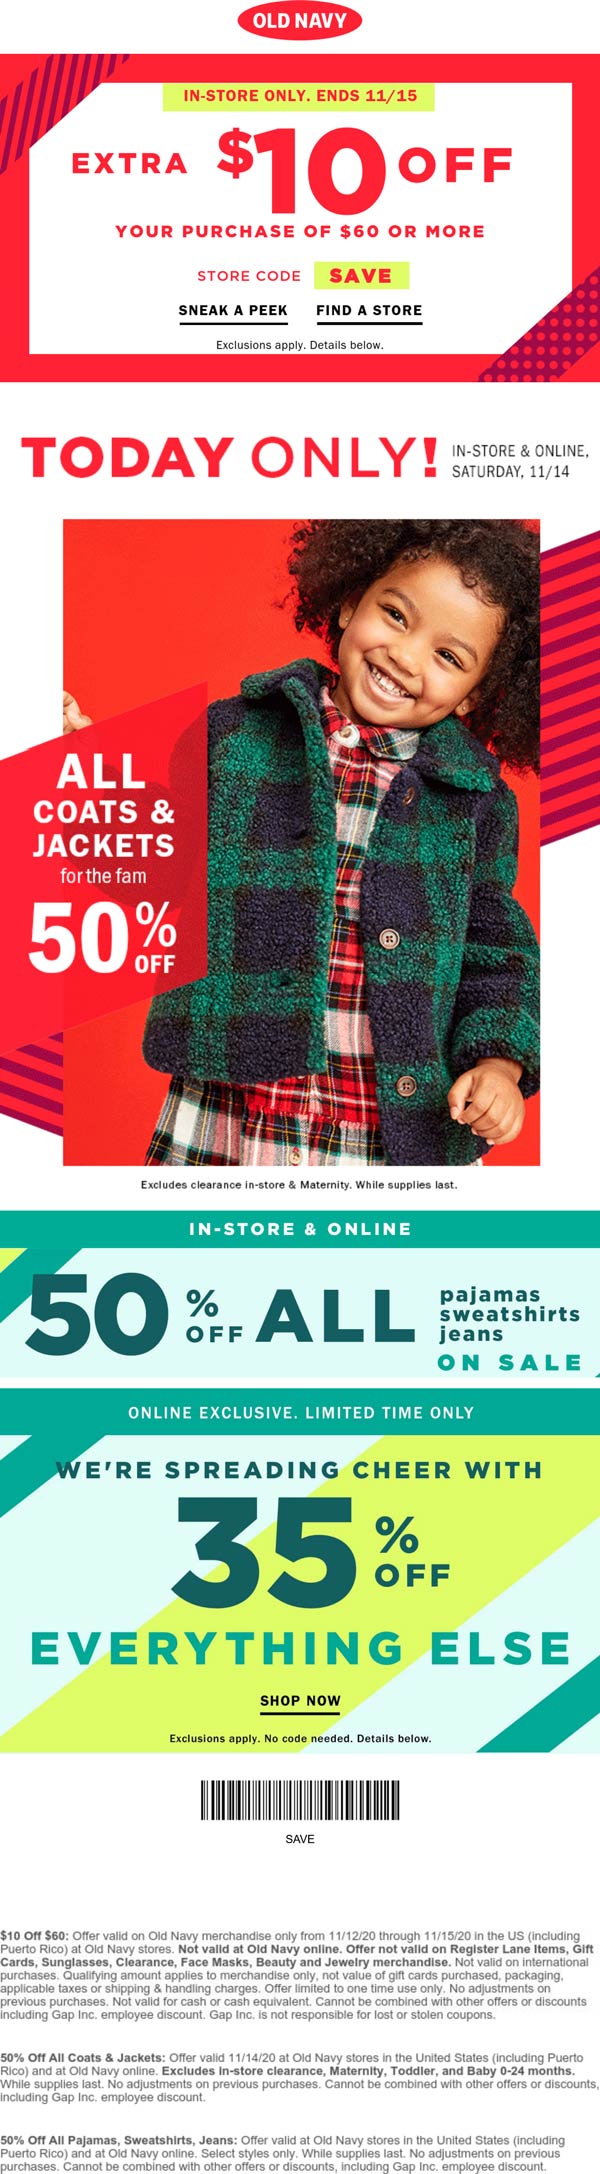 10-off-60-more-at-old-navy-or-35-off-everything-online-oldnavy